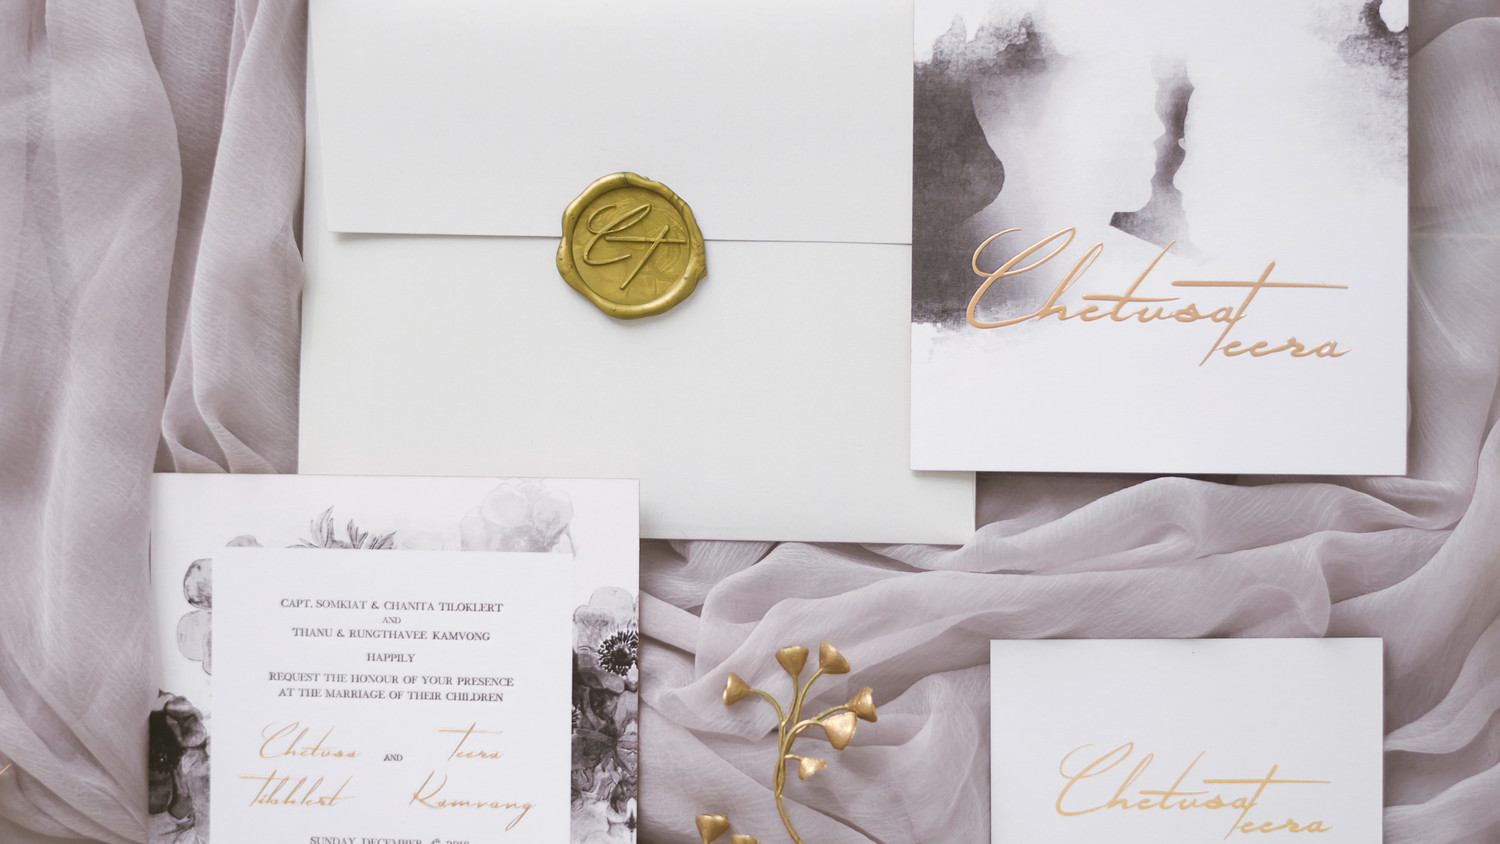 How To Seal Wedding Invitations 9